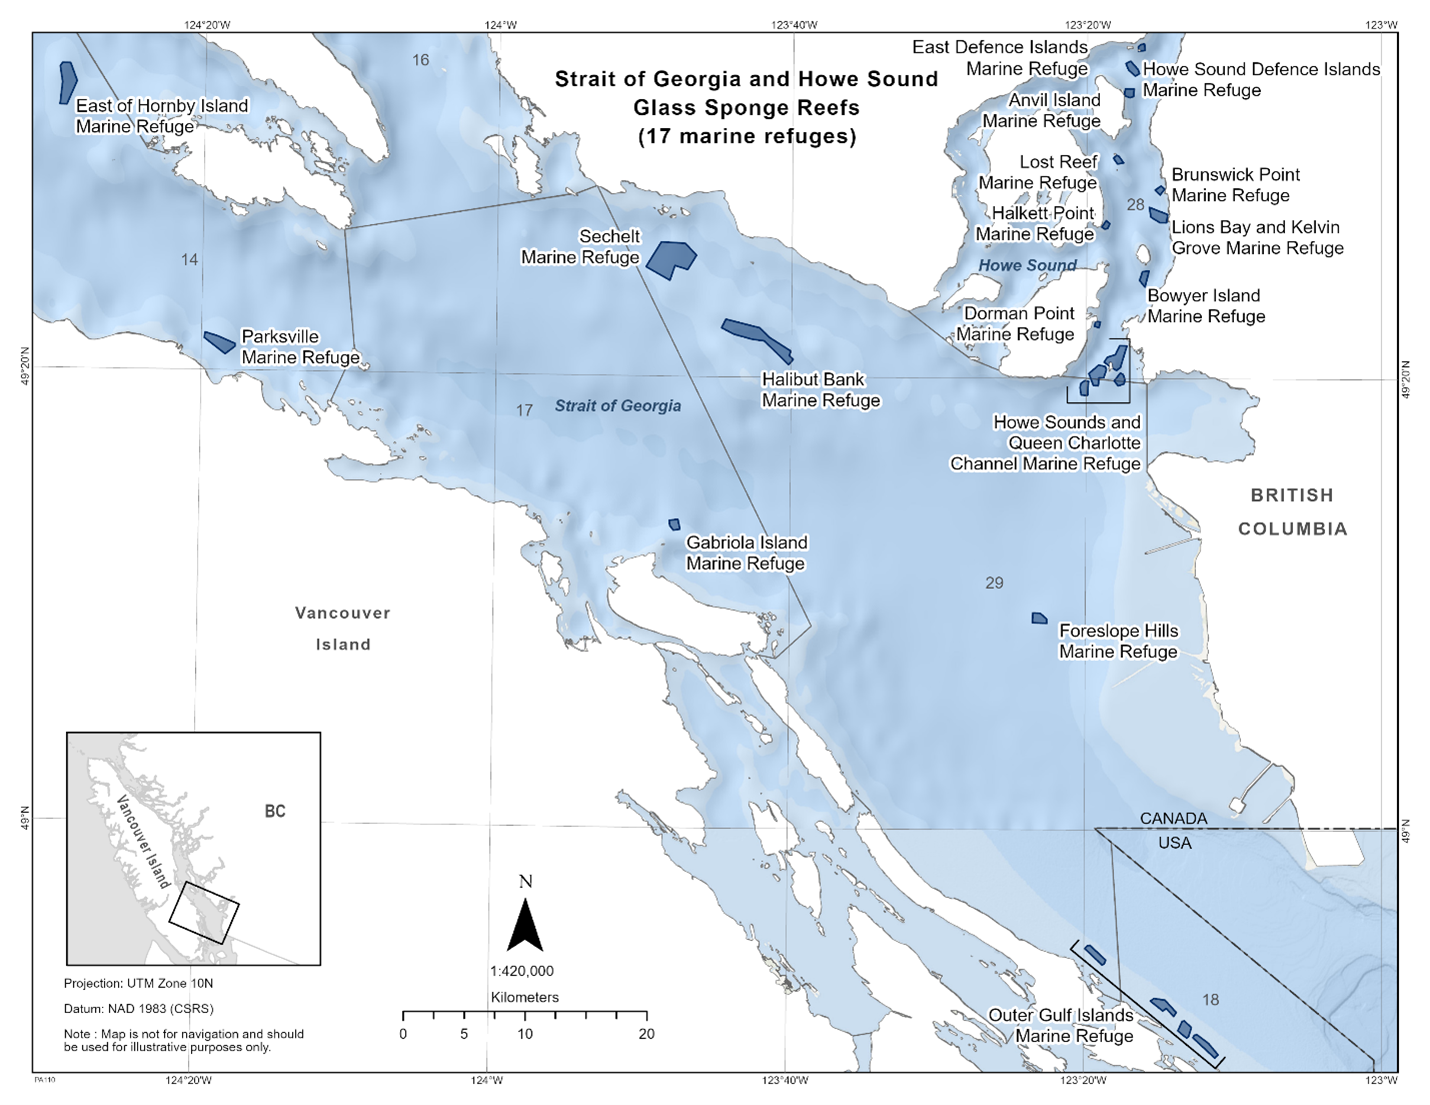 Map of the Strait of Georgia and Howe Sound Glass Sponge Reef in dark blue. 